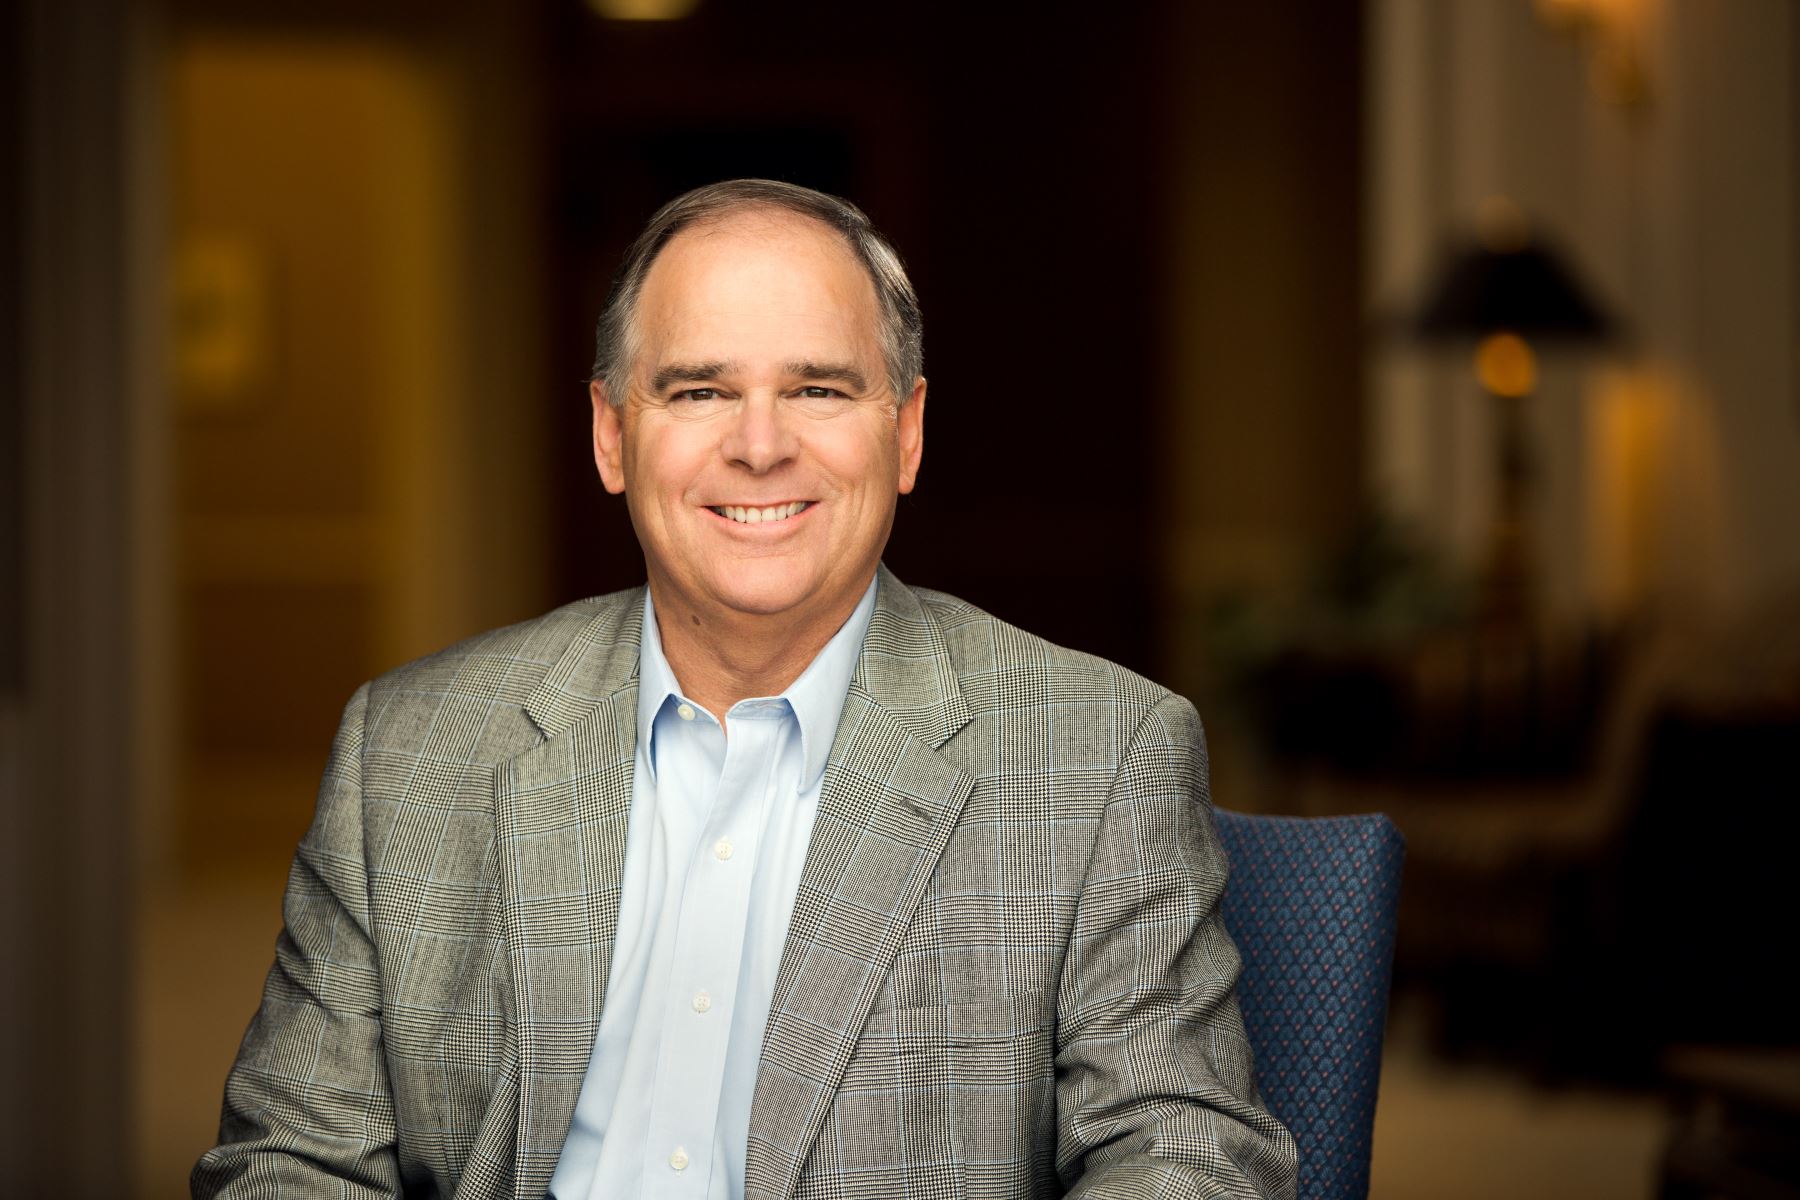 Q&A with Nick Akins, American Electric Power CEO